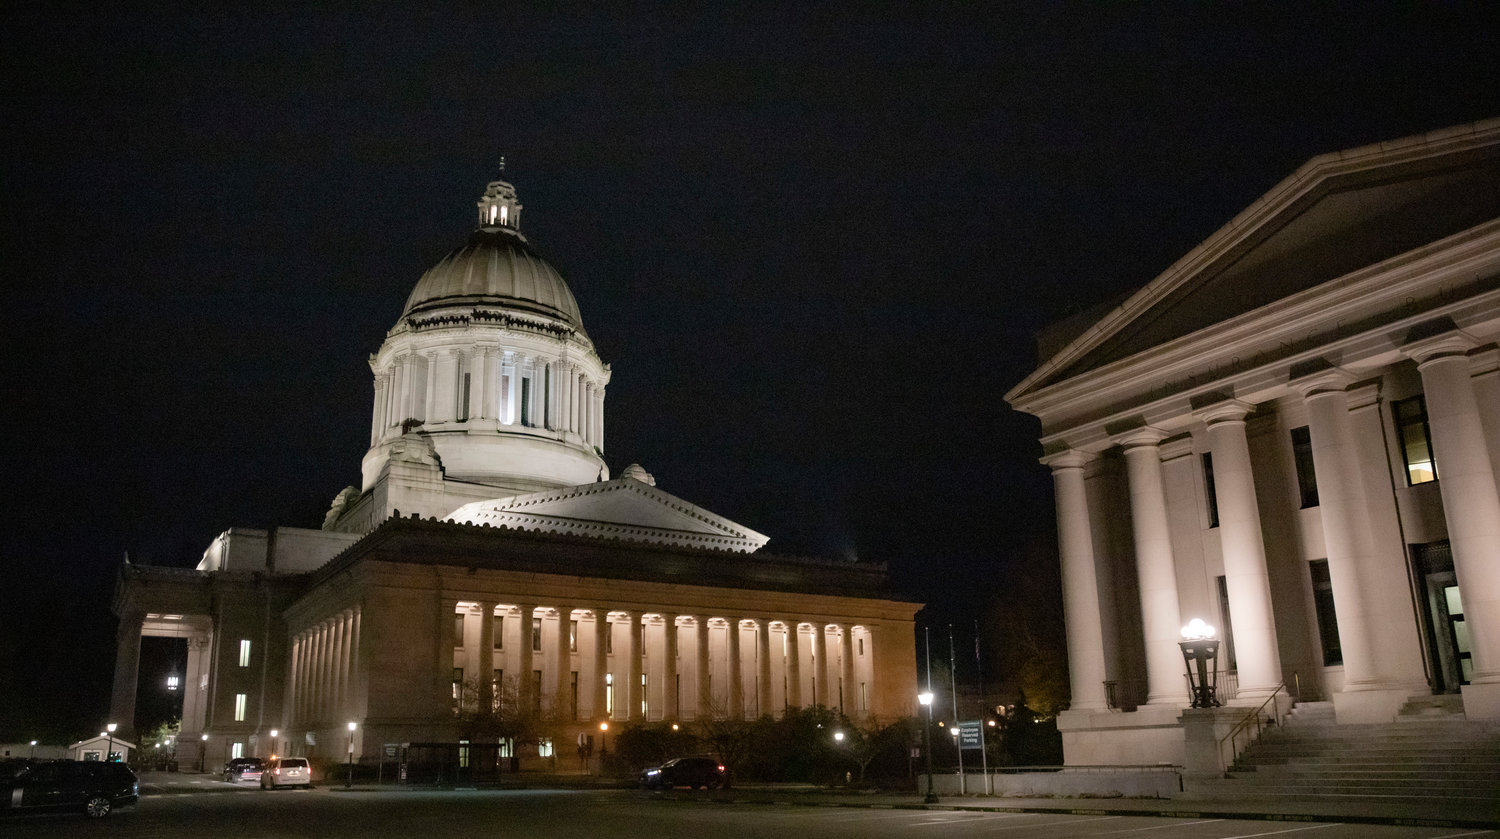 The Capitol building in Olympia, home to the Senate and House chambers, is lit up on the evening of Thursday, Feb. 16.